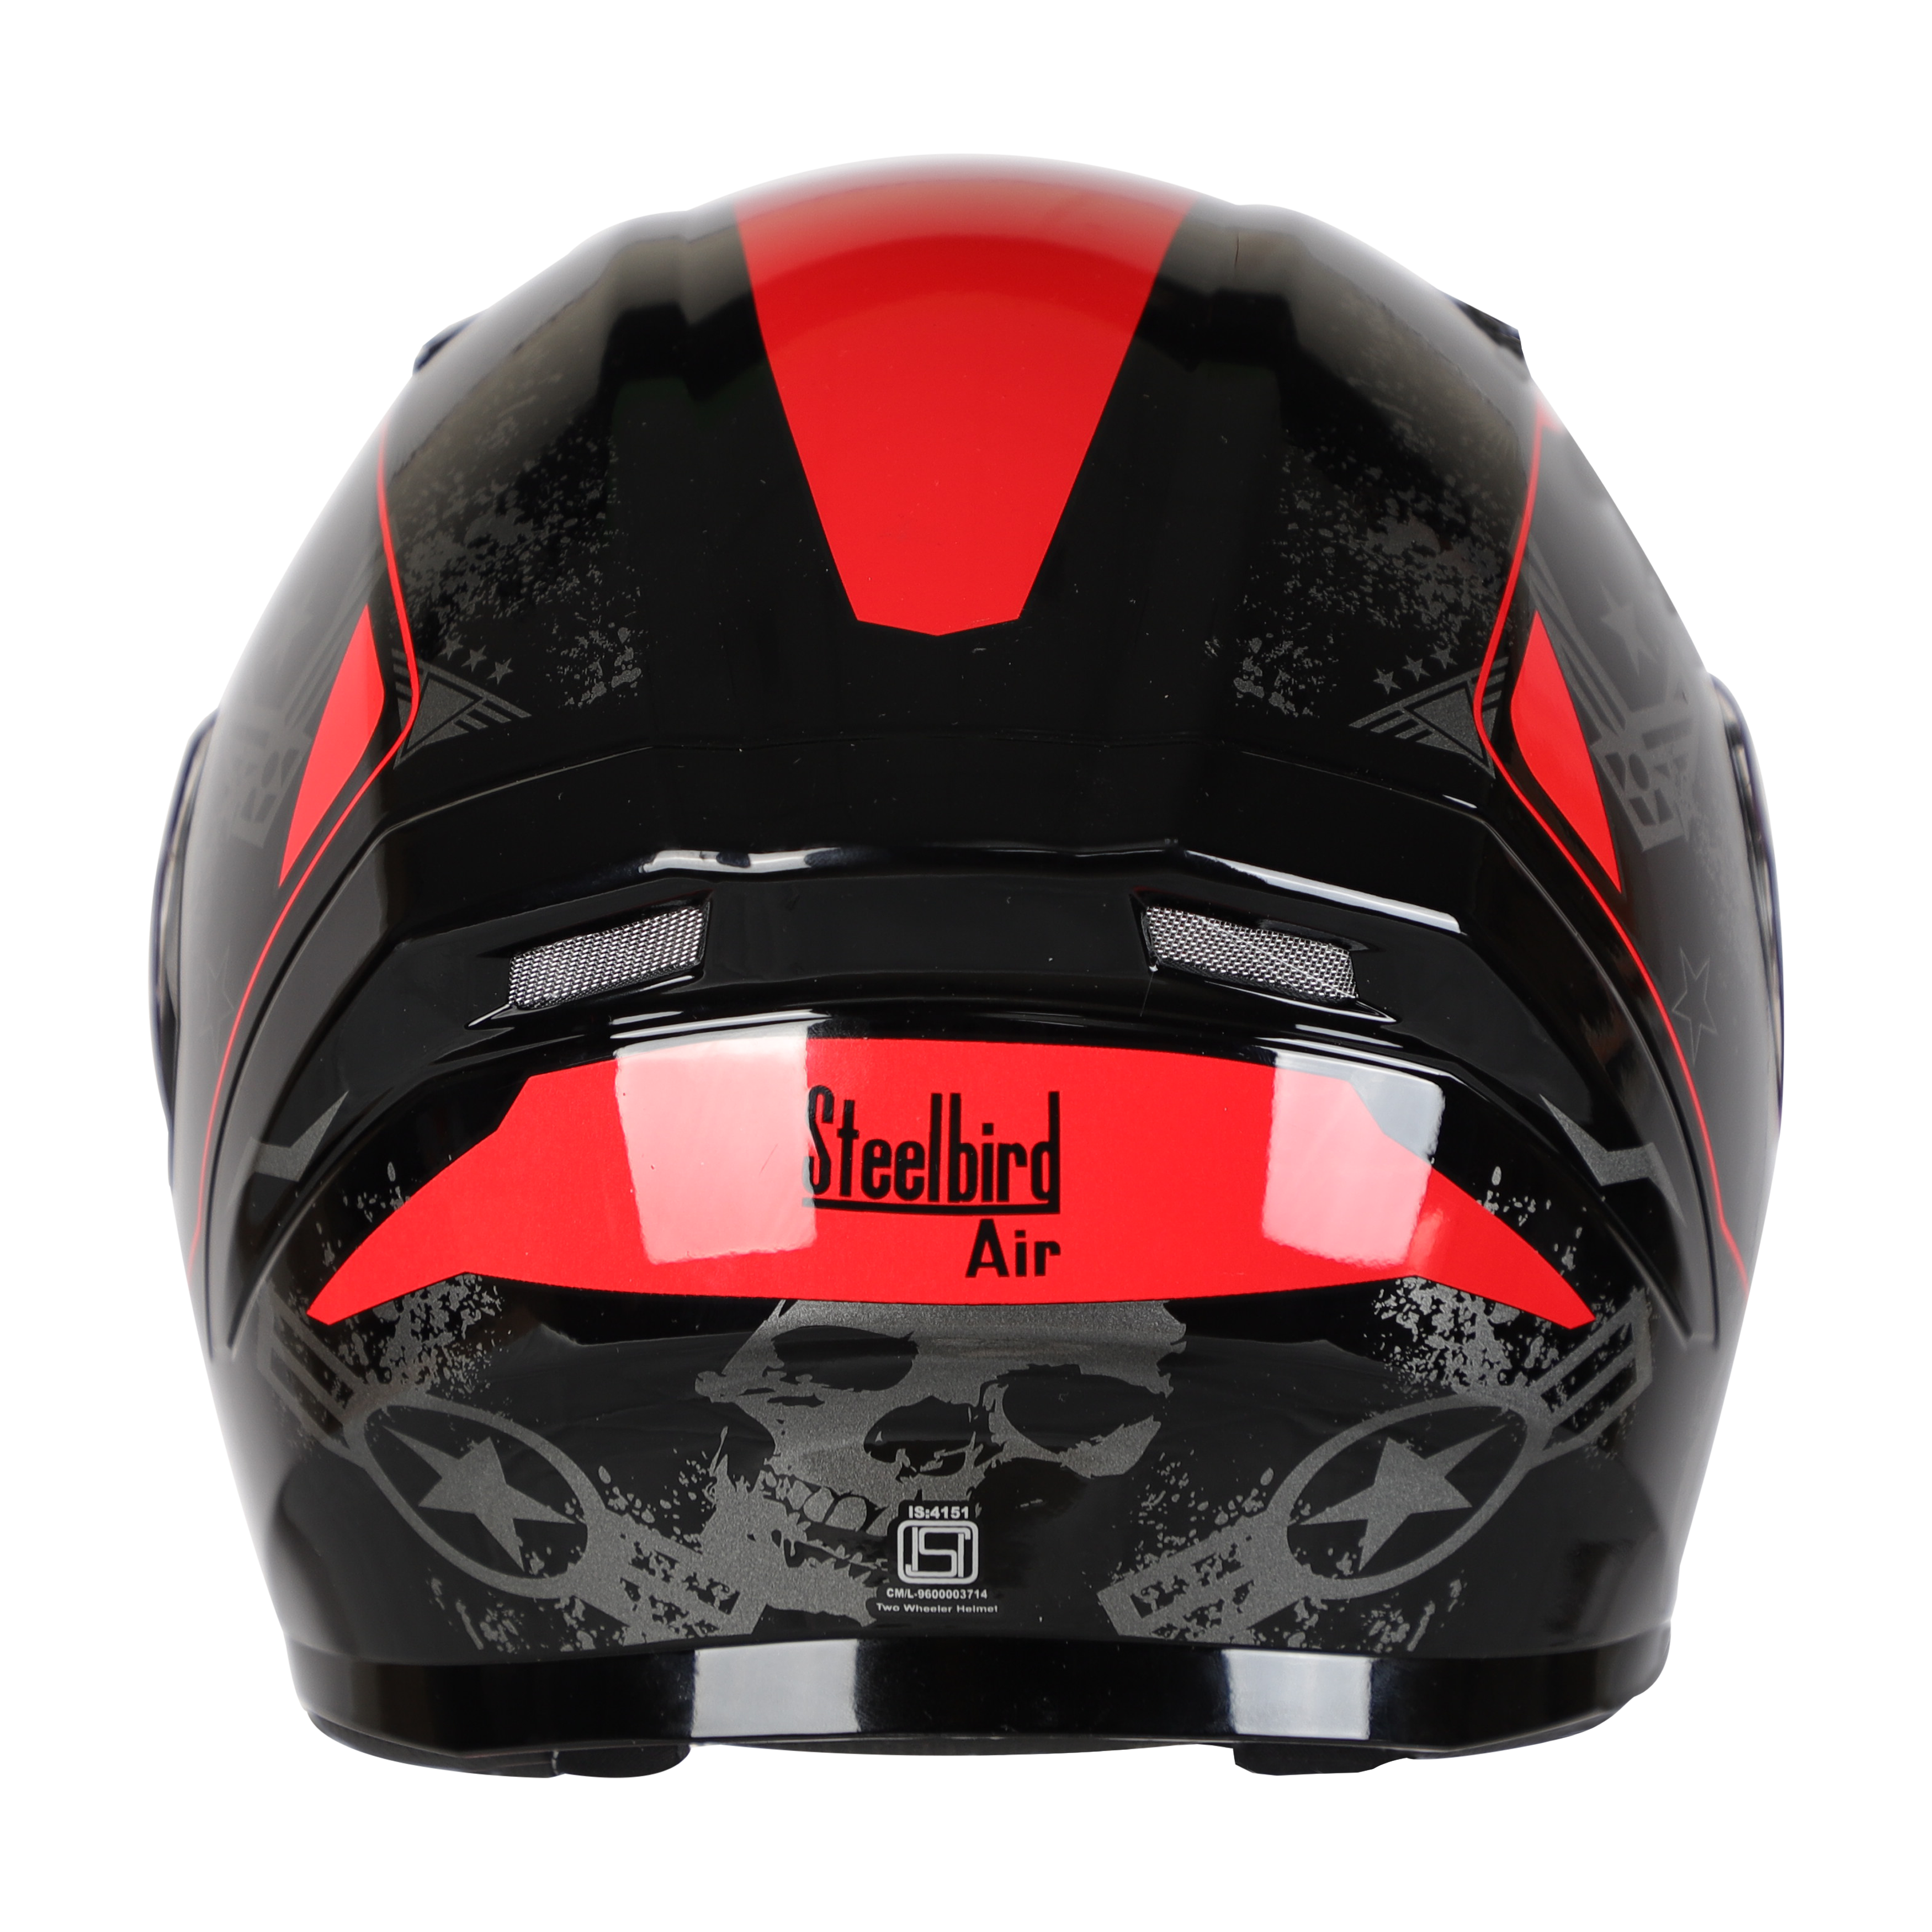 SBA-21 COMBAT GLOSSY BLACK WITH RED ( WITH LONG CHEEK PAD INTERIOR)